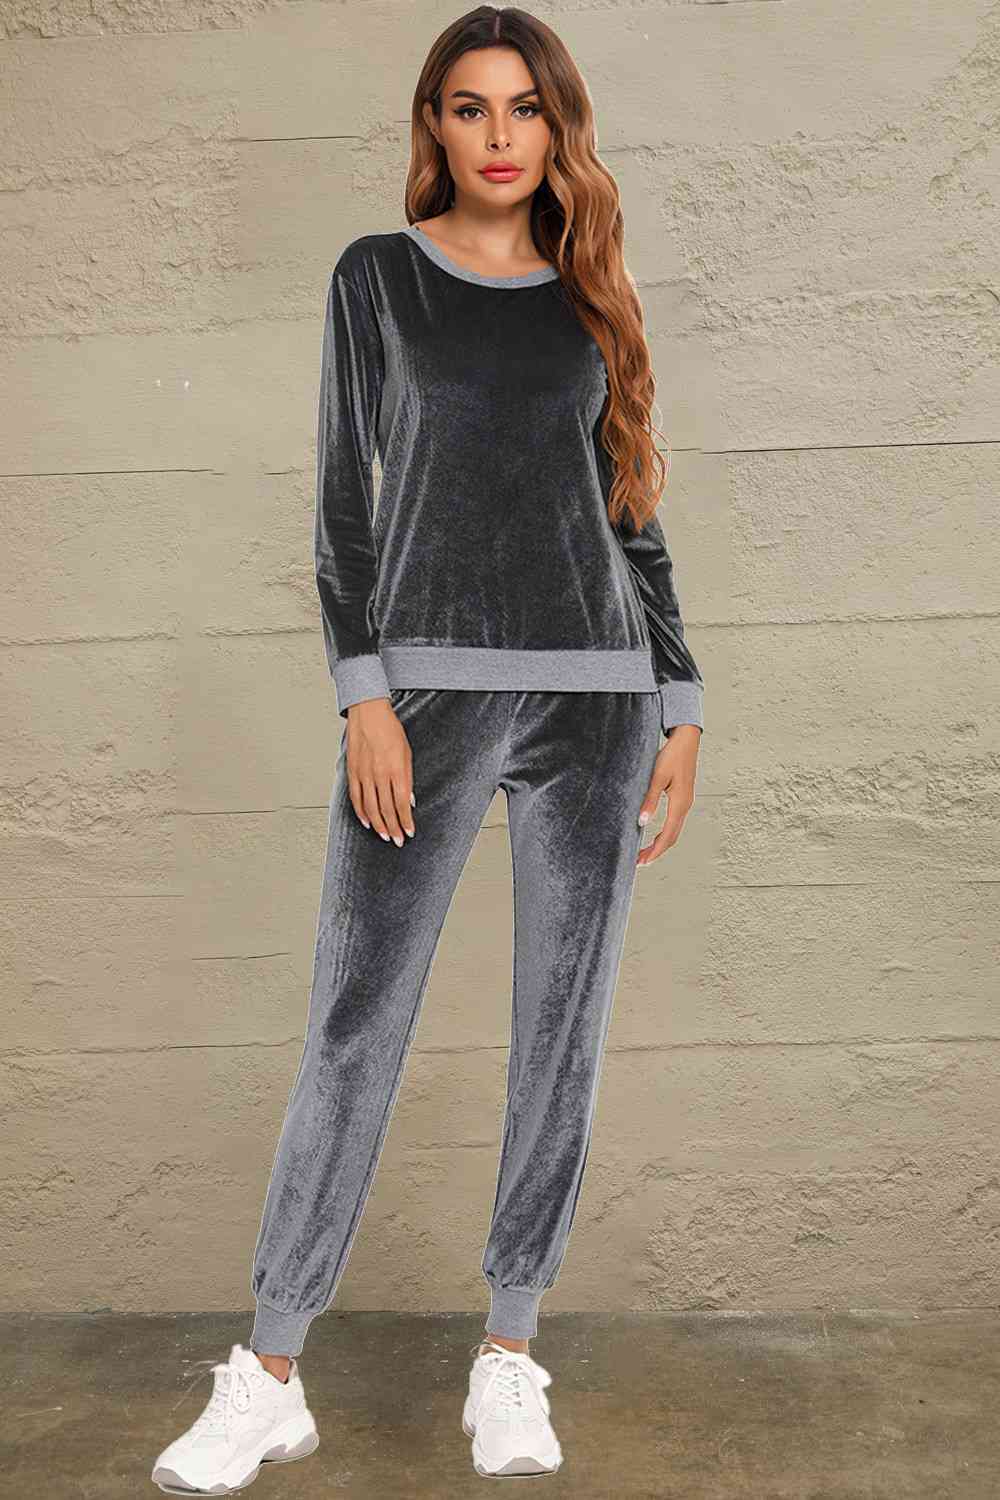 Round Neck Long Sleeve Loungewear Set with Pockets (3 Colors) Loungewear Krazy Heart Designs Boutique Charcoal S 